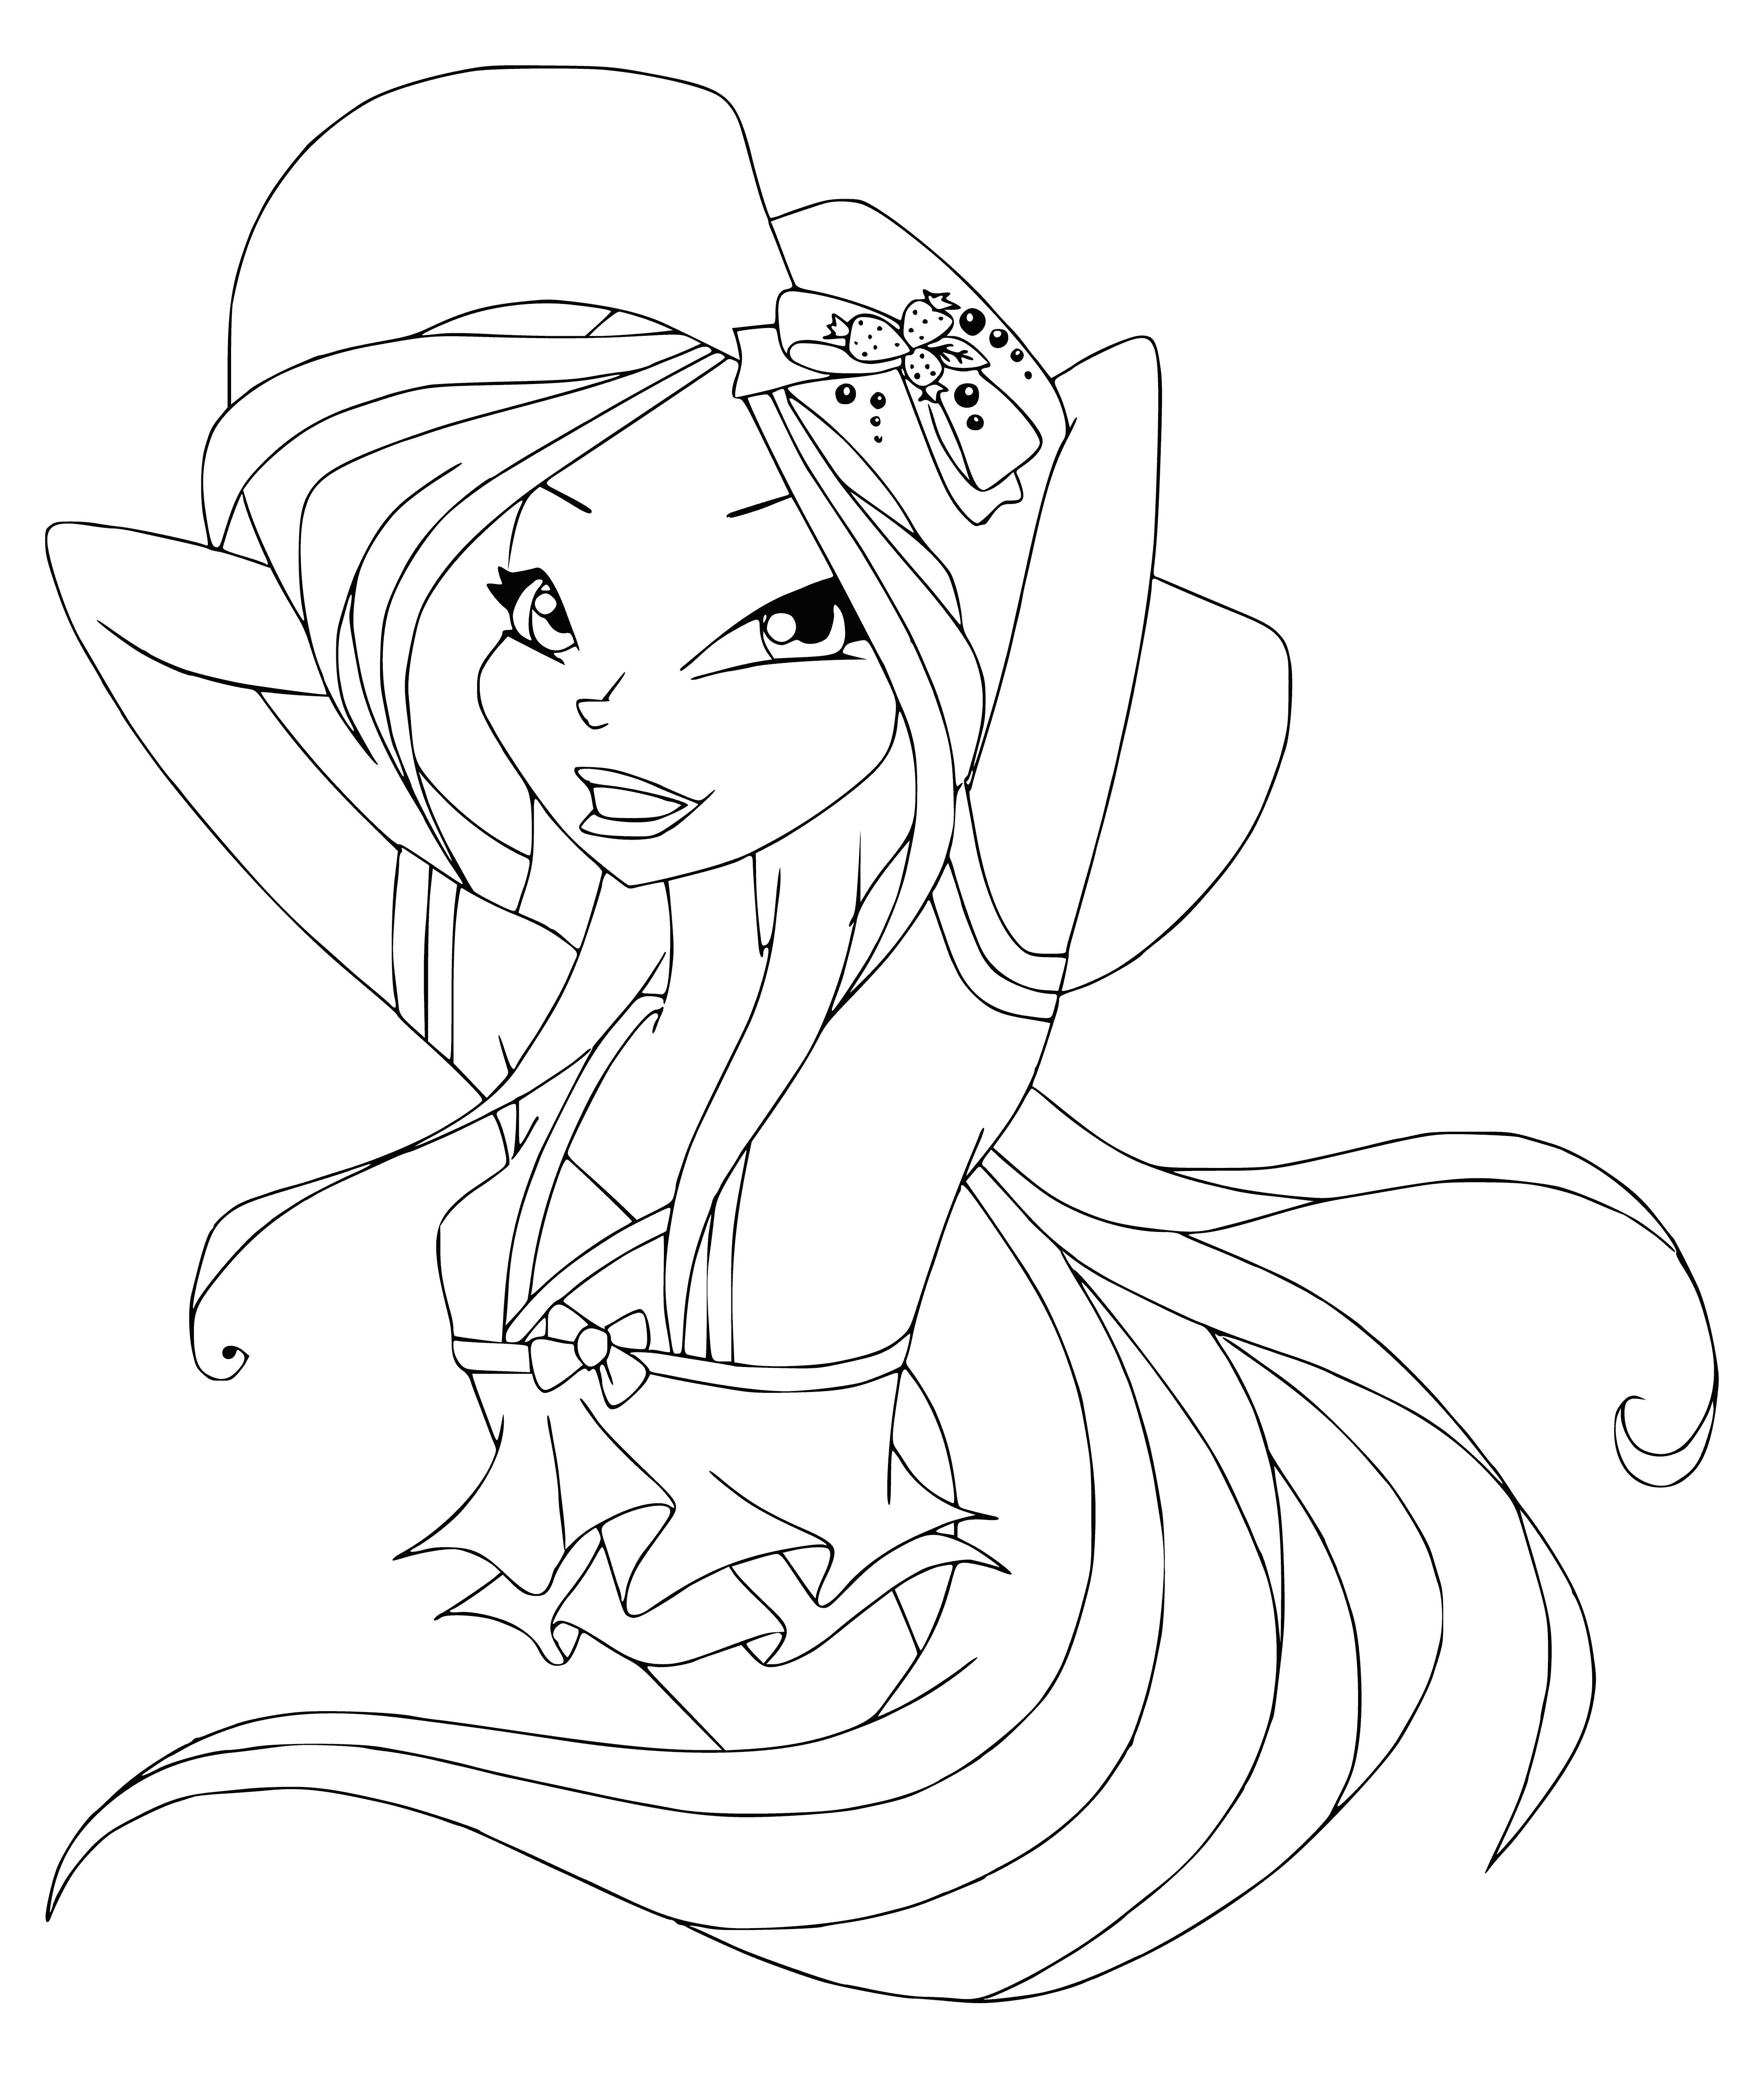 Woman in white dress wearing floral hat reads book; coloring page to be enjoyed by all.